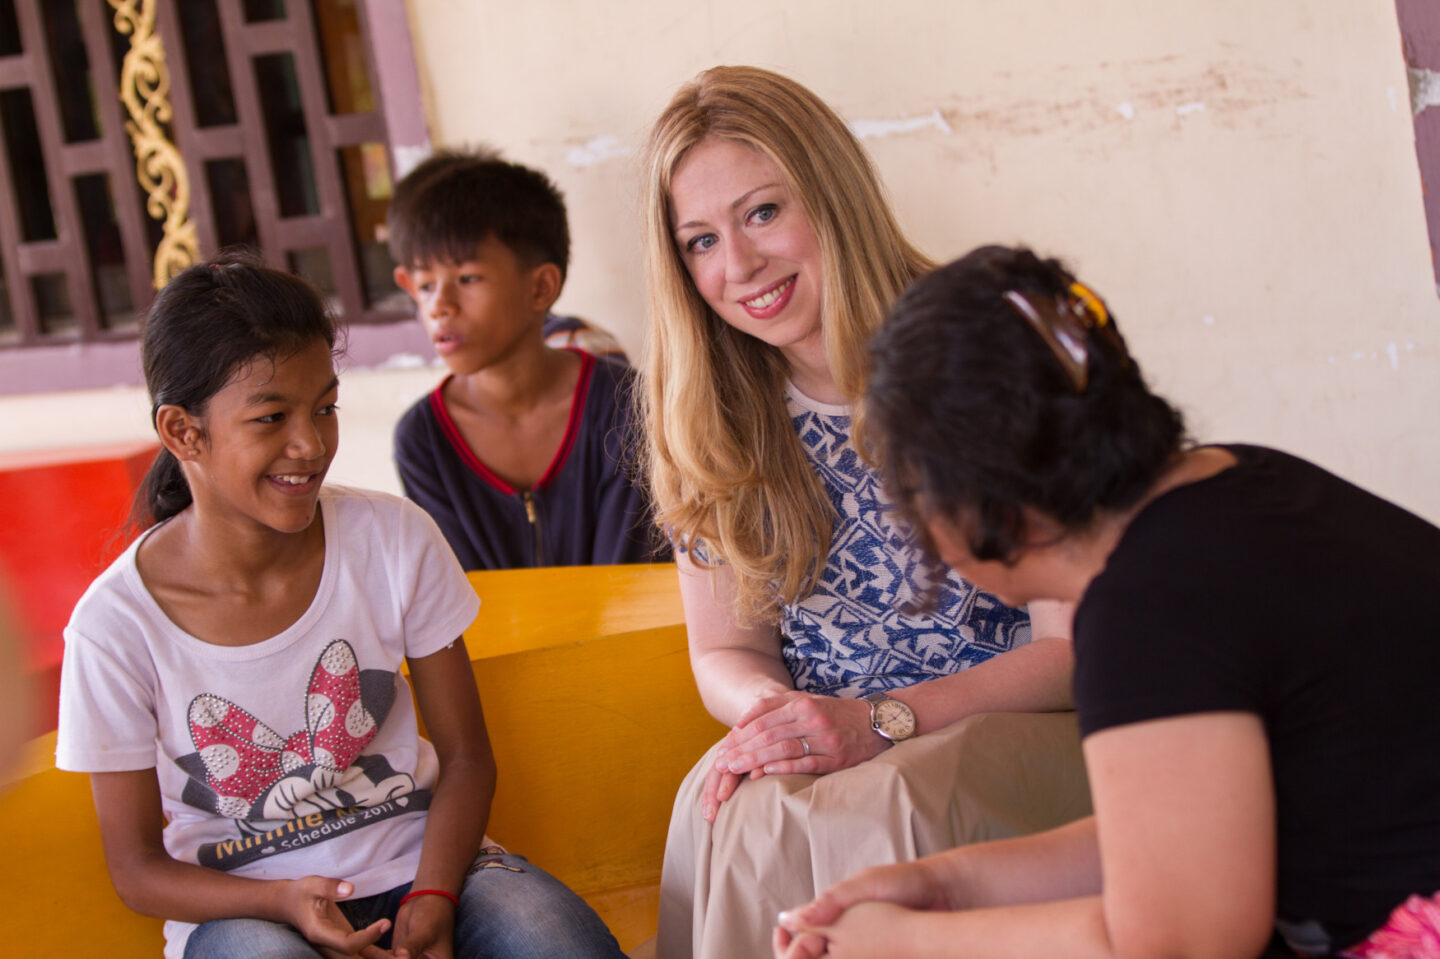 Chelsea Clinton speaks with several individuals at an orphanage in Cambodia